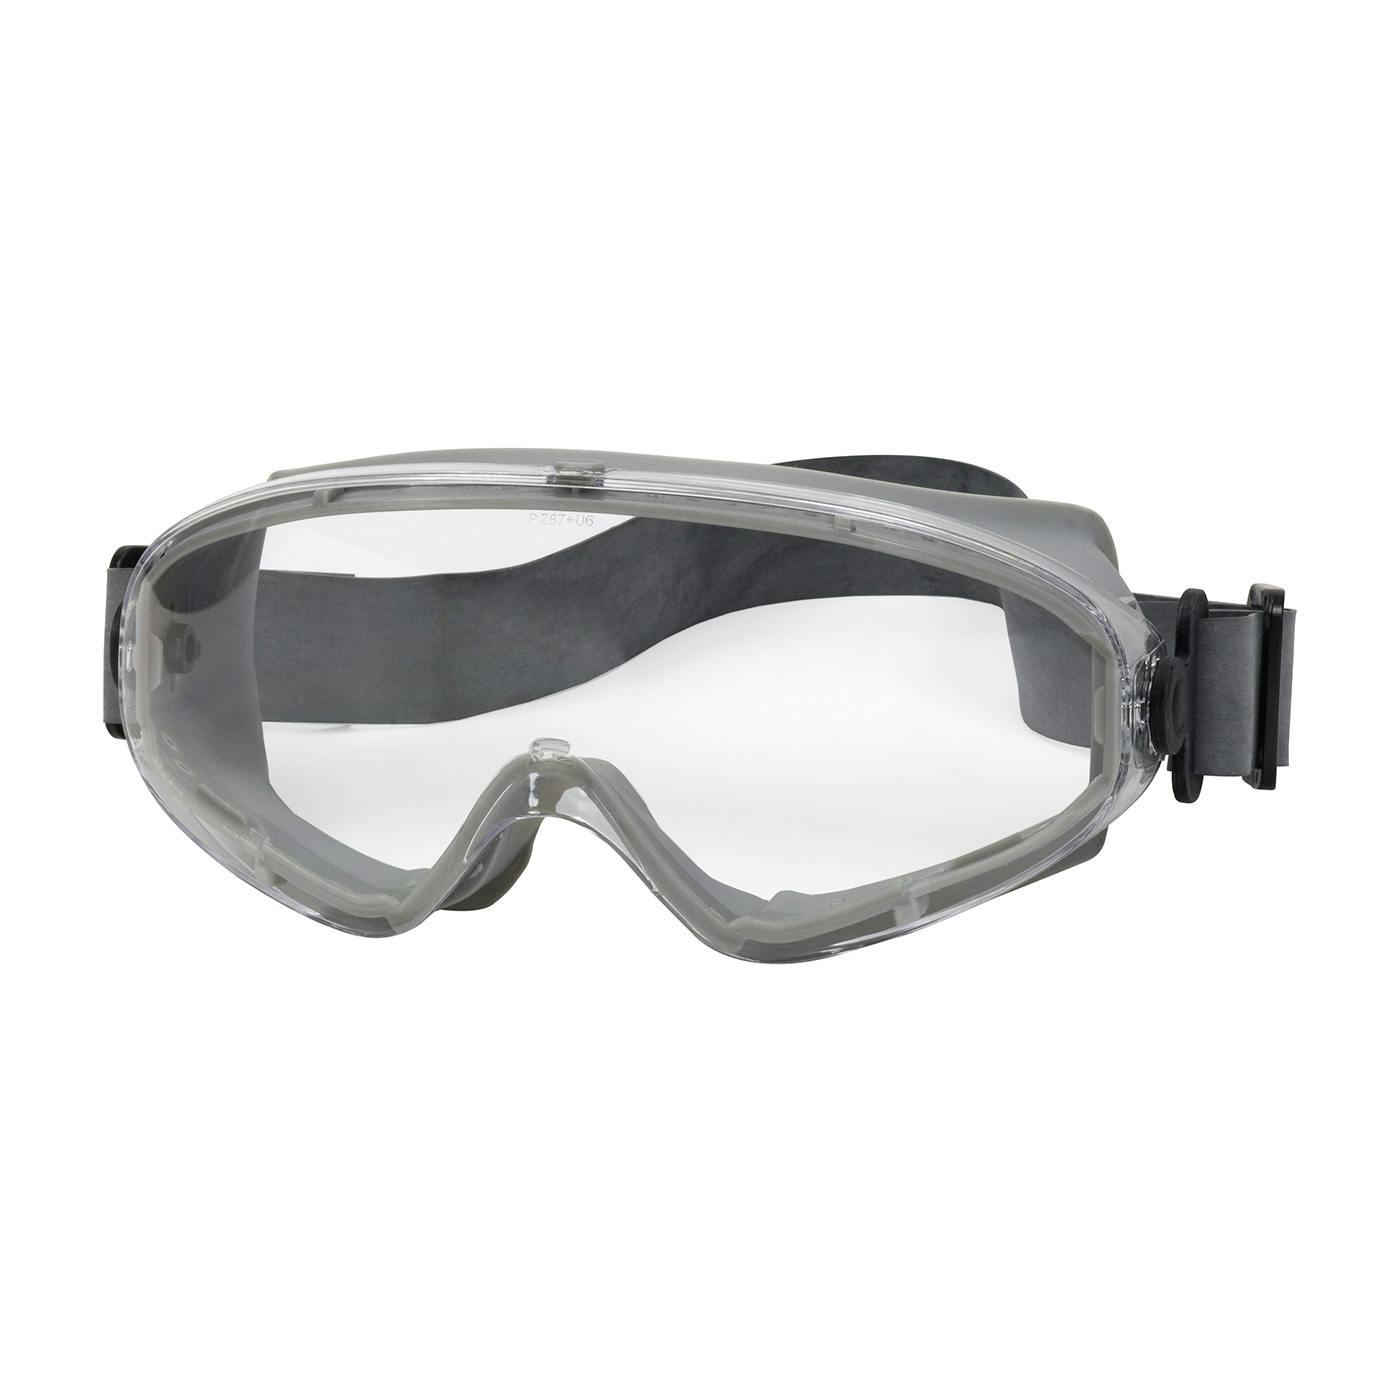 Indirect Vent Goggle with Light Gray Body, Clear Lens and Anti-Scratch / Anti-Fog Coating  - Neoprene Strap, Gray (251-80-0020-RHB) - OS_0